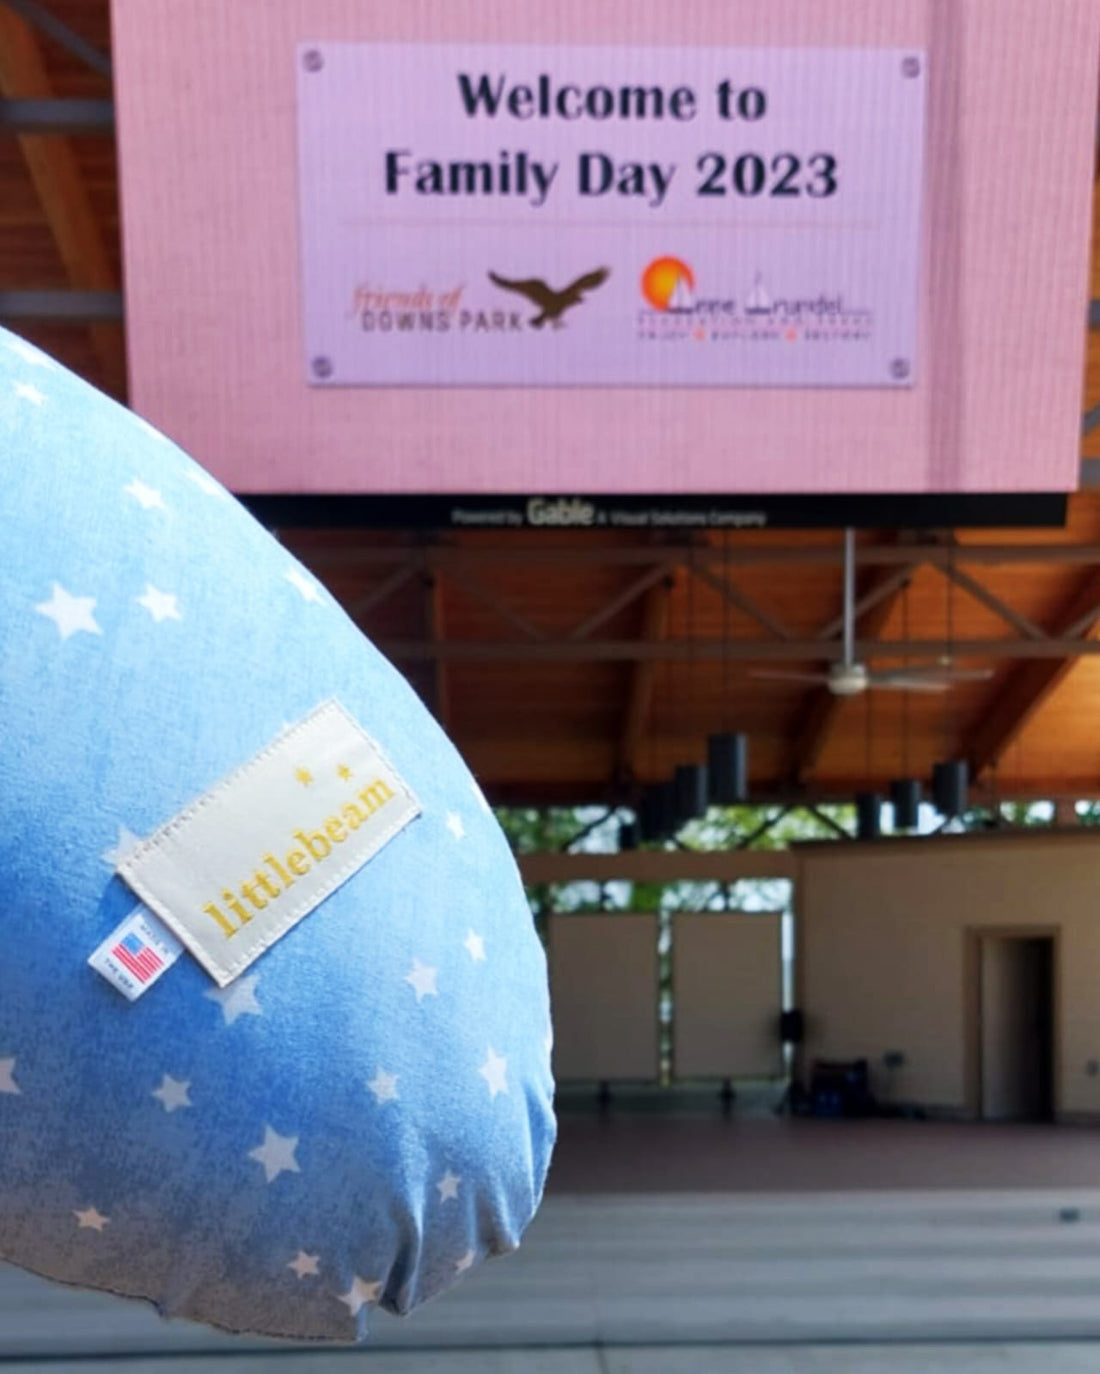 Littlebeam at the Family Day 2023